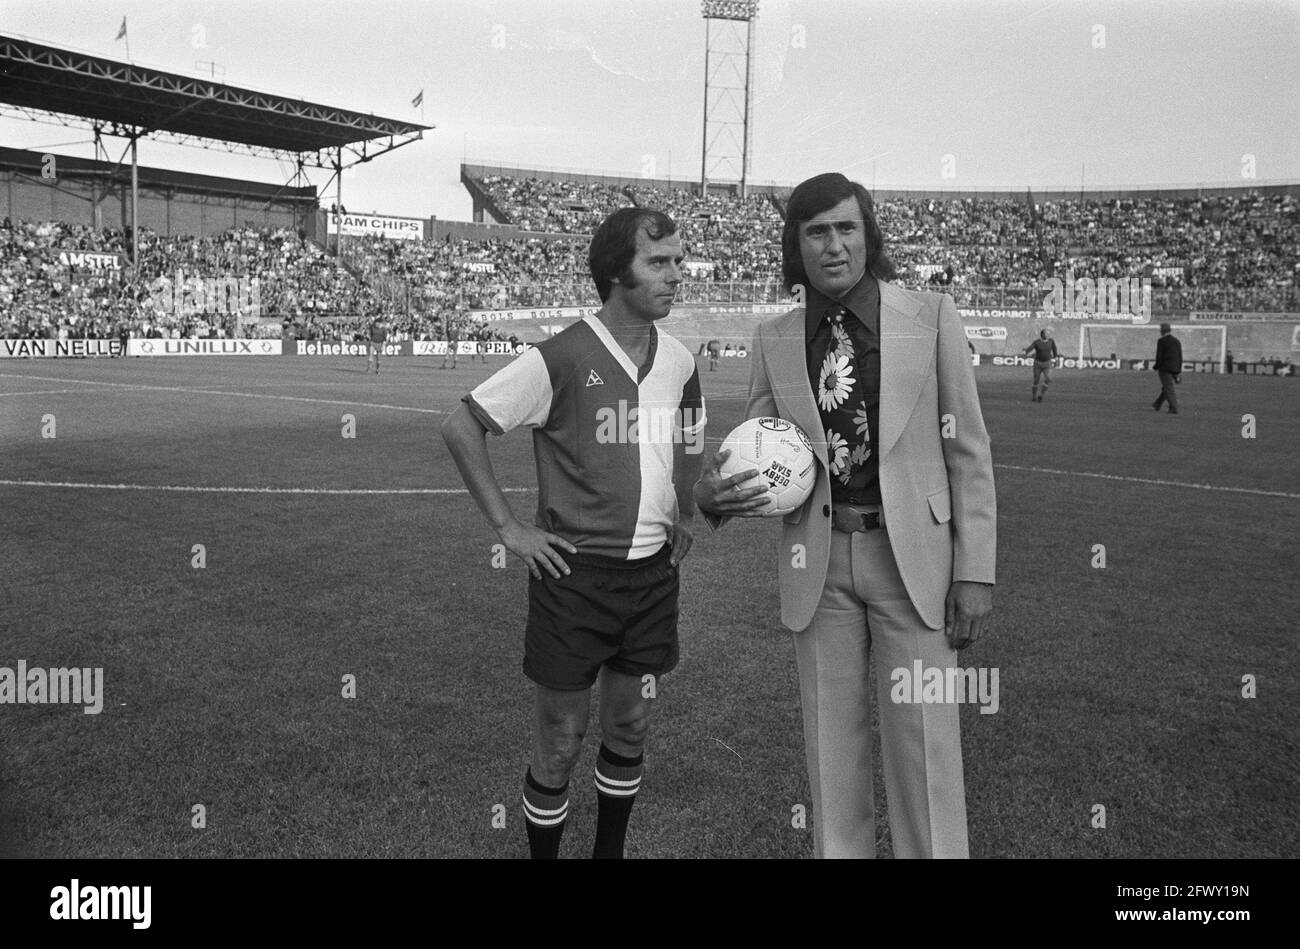 Former Ajax against former Feyenoord, Sjaak Swart (right) and Coen Moulijn, August 8, 1973, sports, soccer, footballers, The Netherlands, 20th century Stock Photo